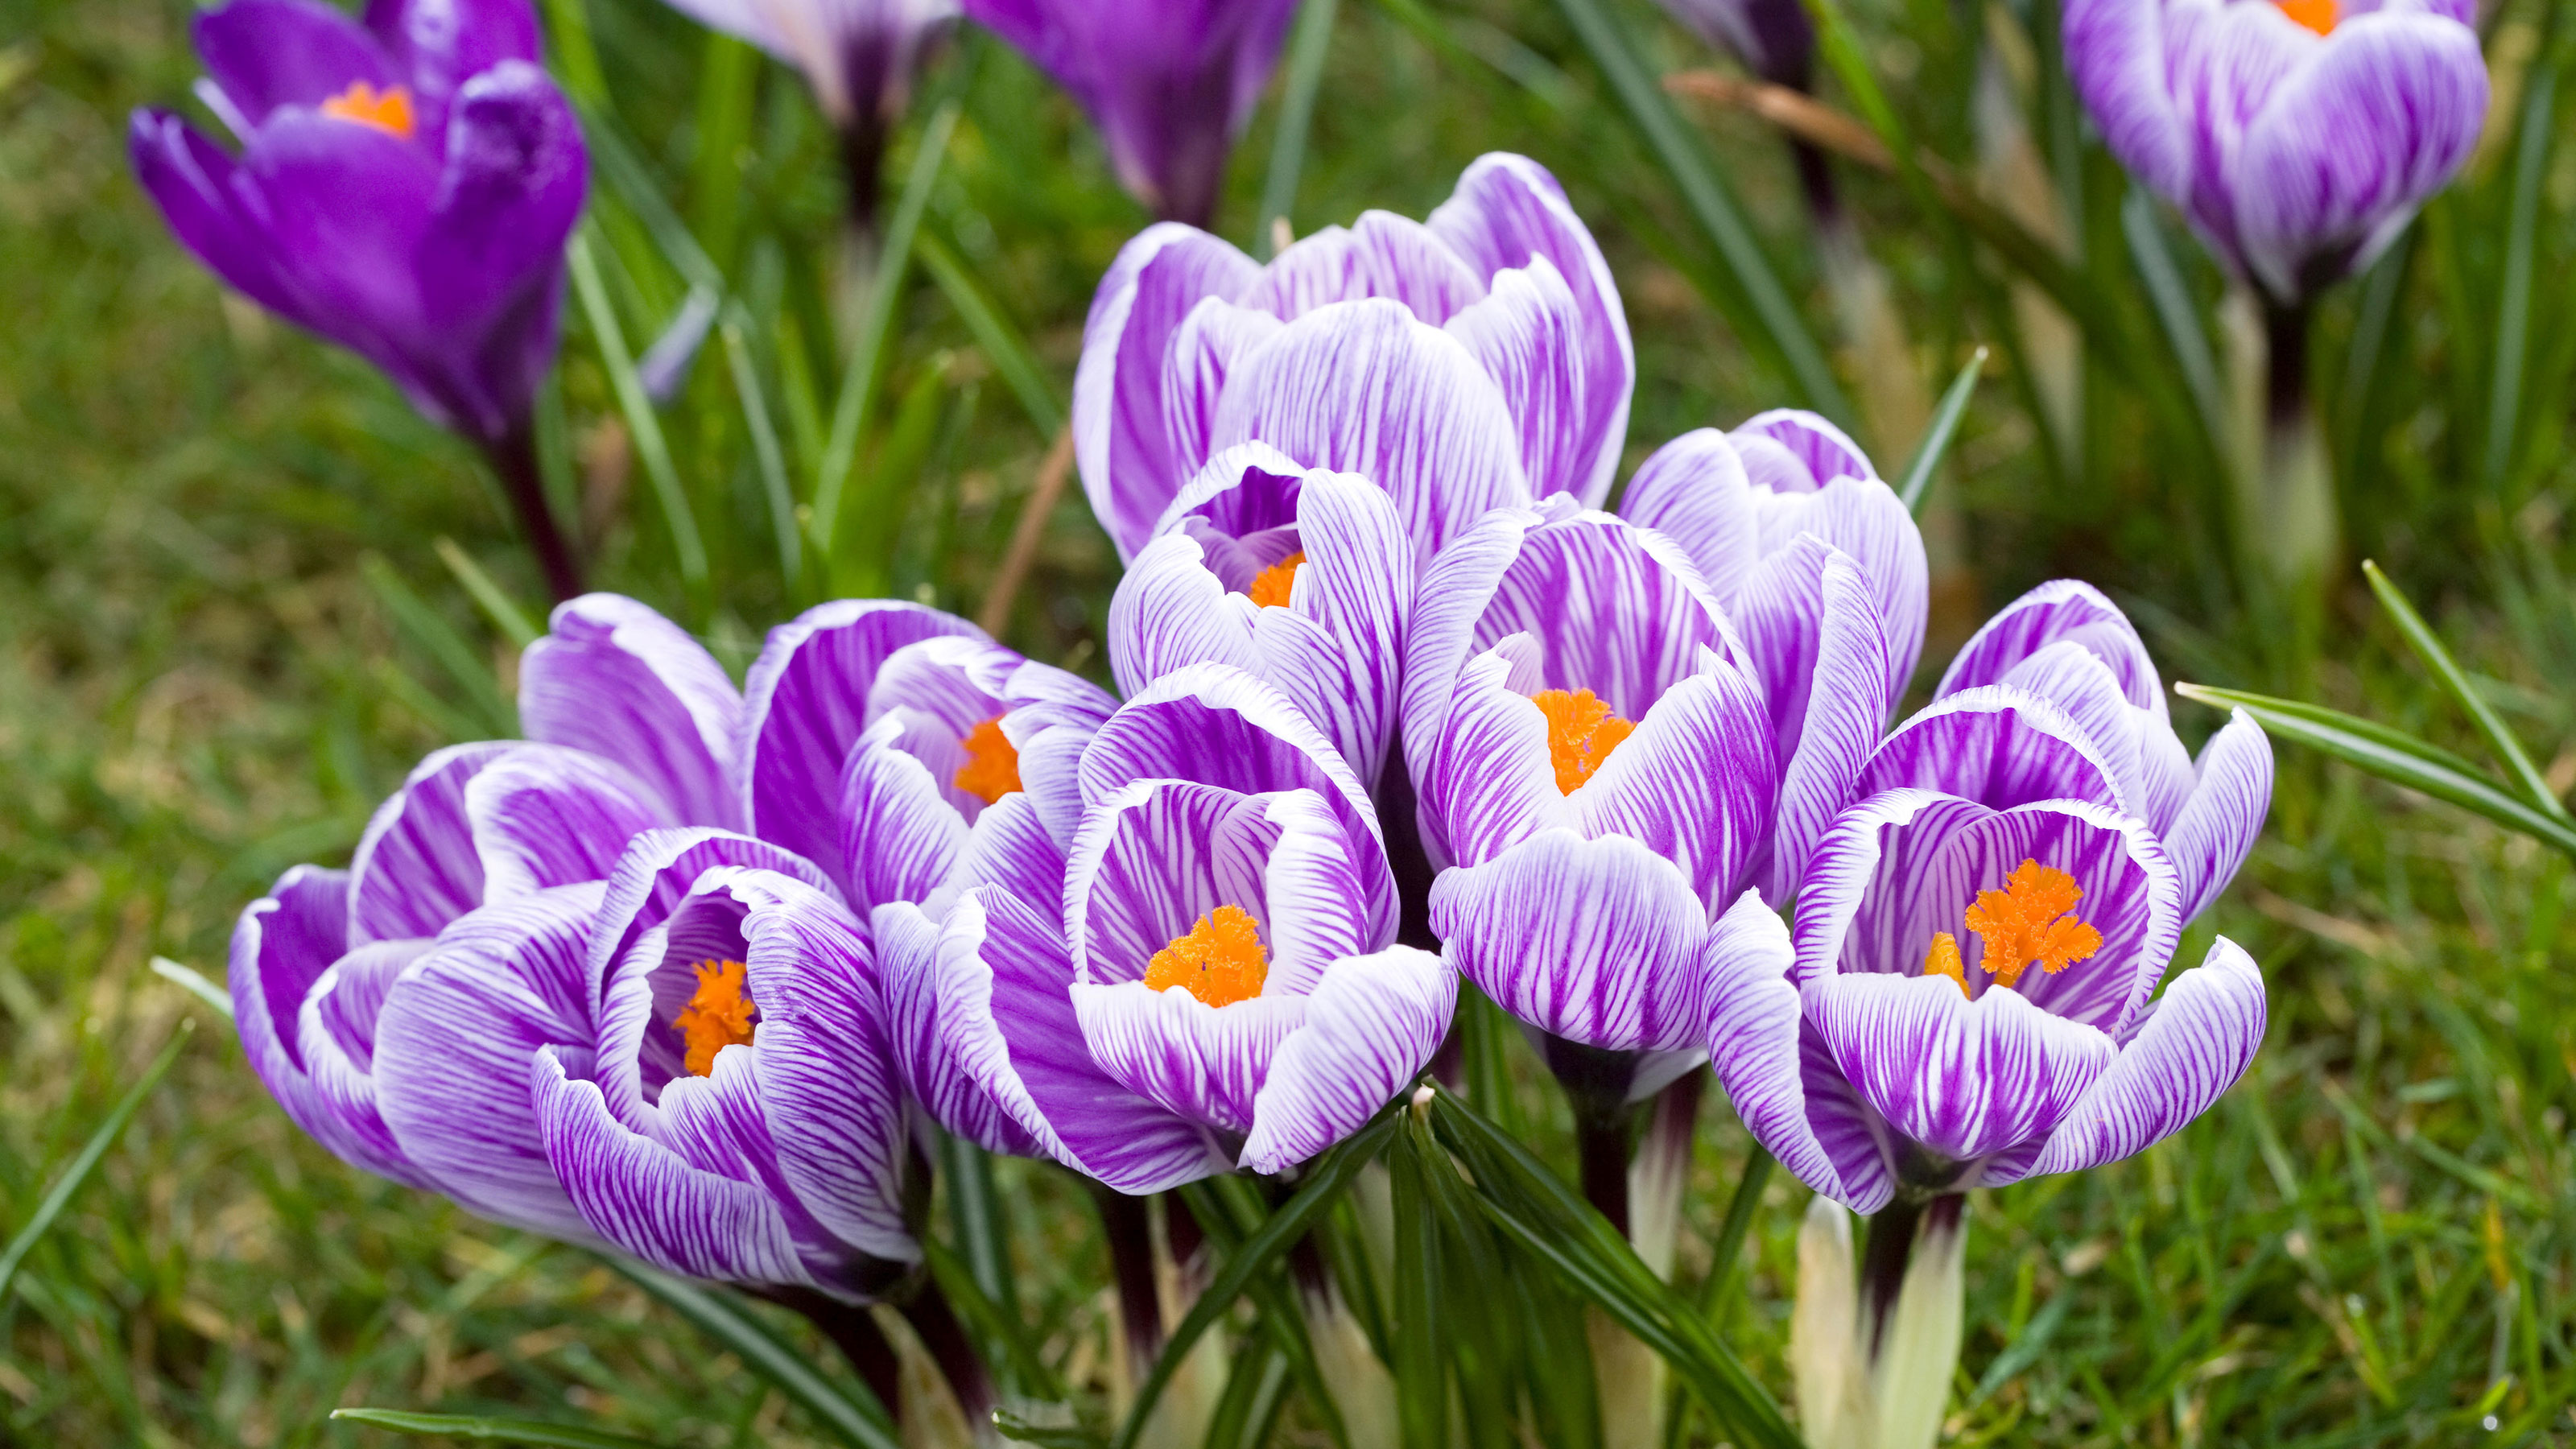 Crocus plant care and growing guide | Gardeningetc